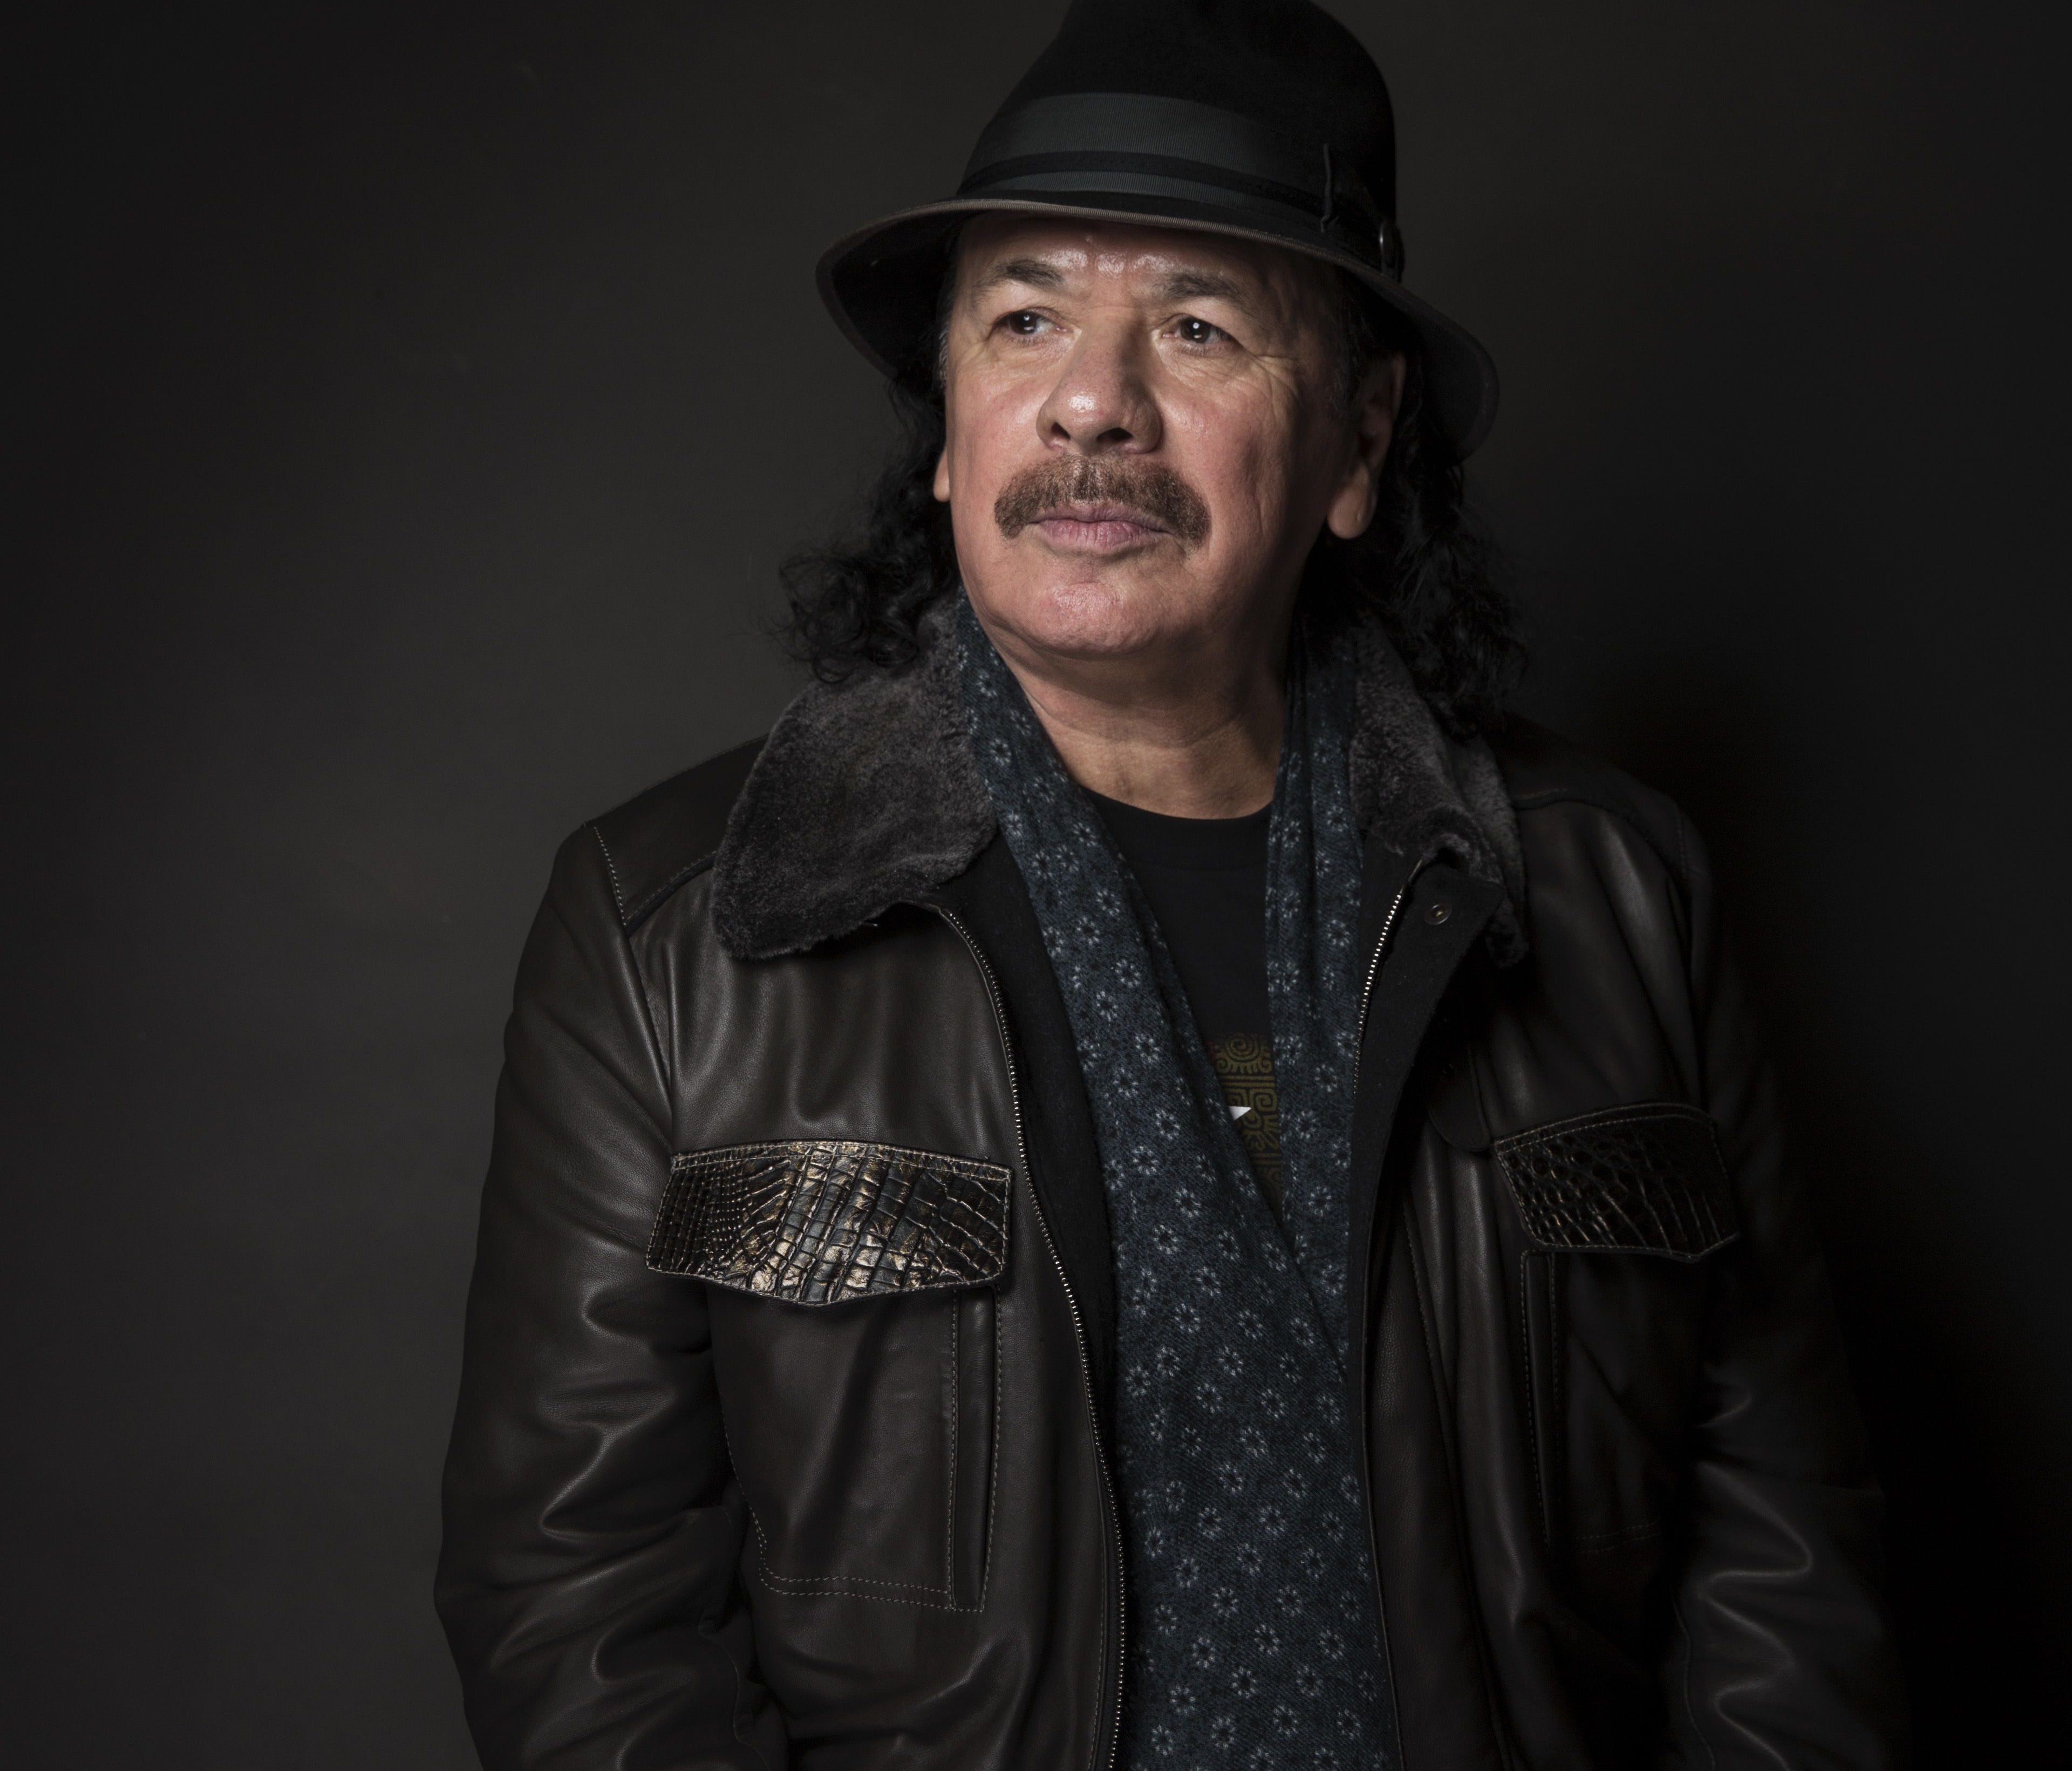 Carlos Santana is clarifying comments he made about Adele and Beyonce.